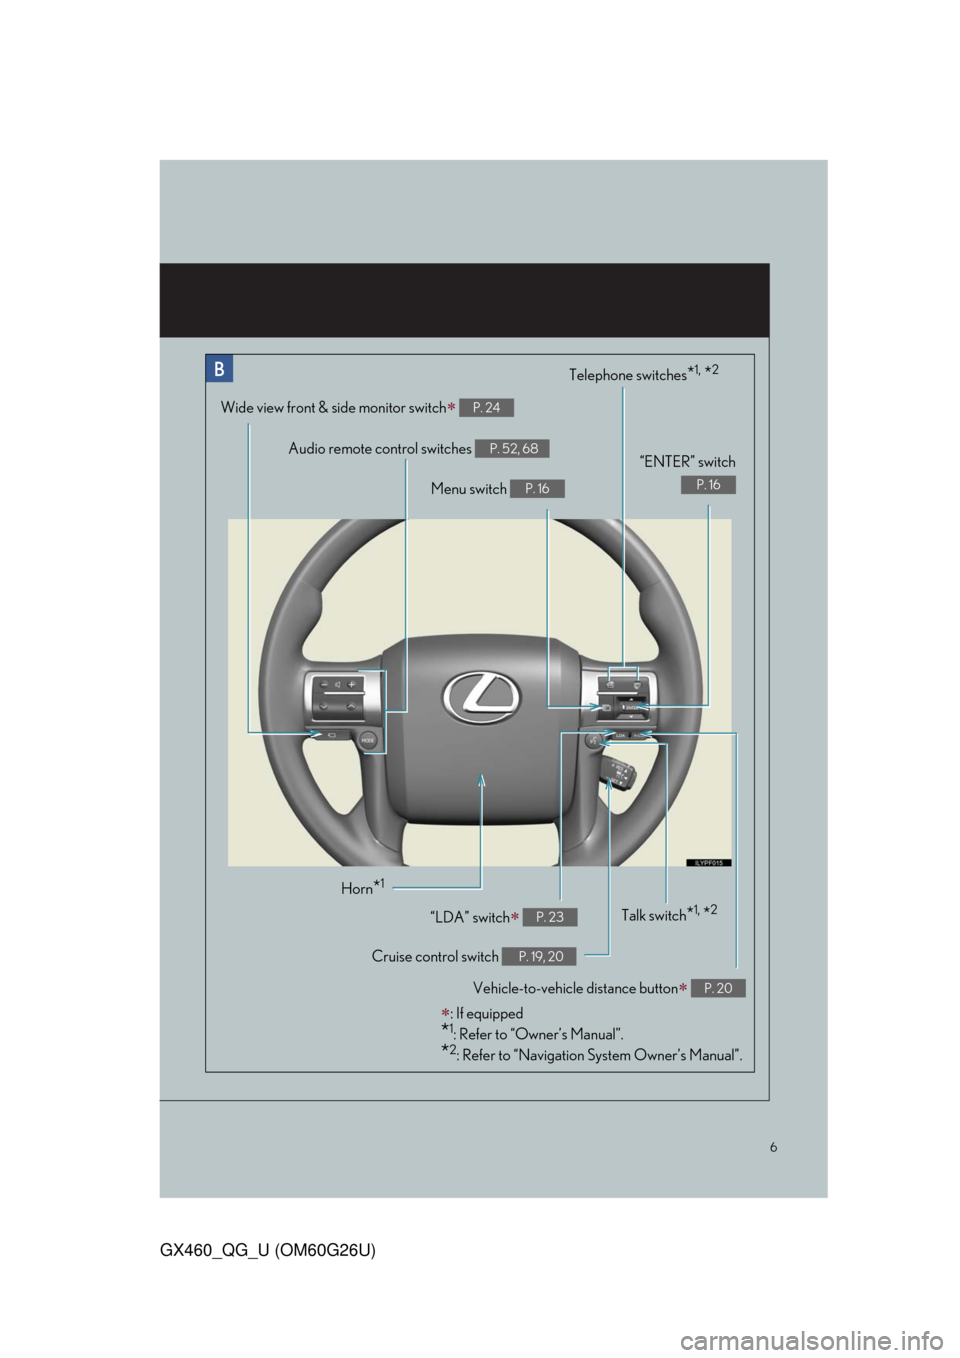 Lexus GX460 2011  Owners Manual / LEXUS 2011 GX460 OWNERS MANUAL QUICK GUIDE (OM60G26U) 6
GX460_QG_U (OM60G26U)
Audio remote control switches P. 52, 68
Telephone switches*1, *2
Menu switch P. 16
“ENTER” switch
P. 16
Wide view front & side monitor switch P. 24
Horn*1
Talk switch*1,